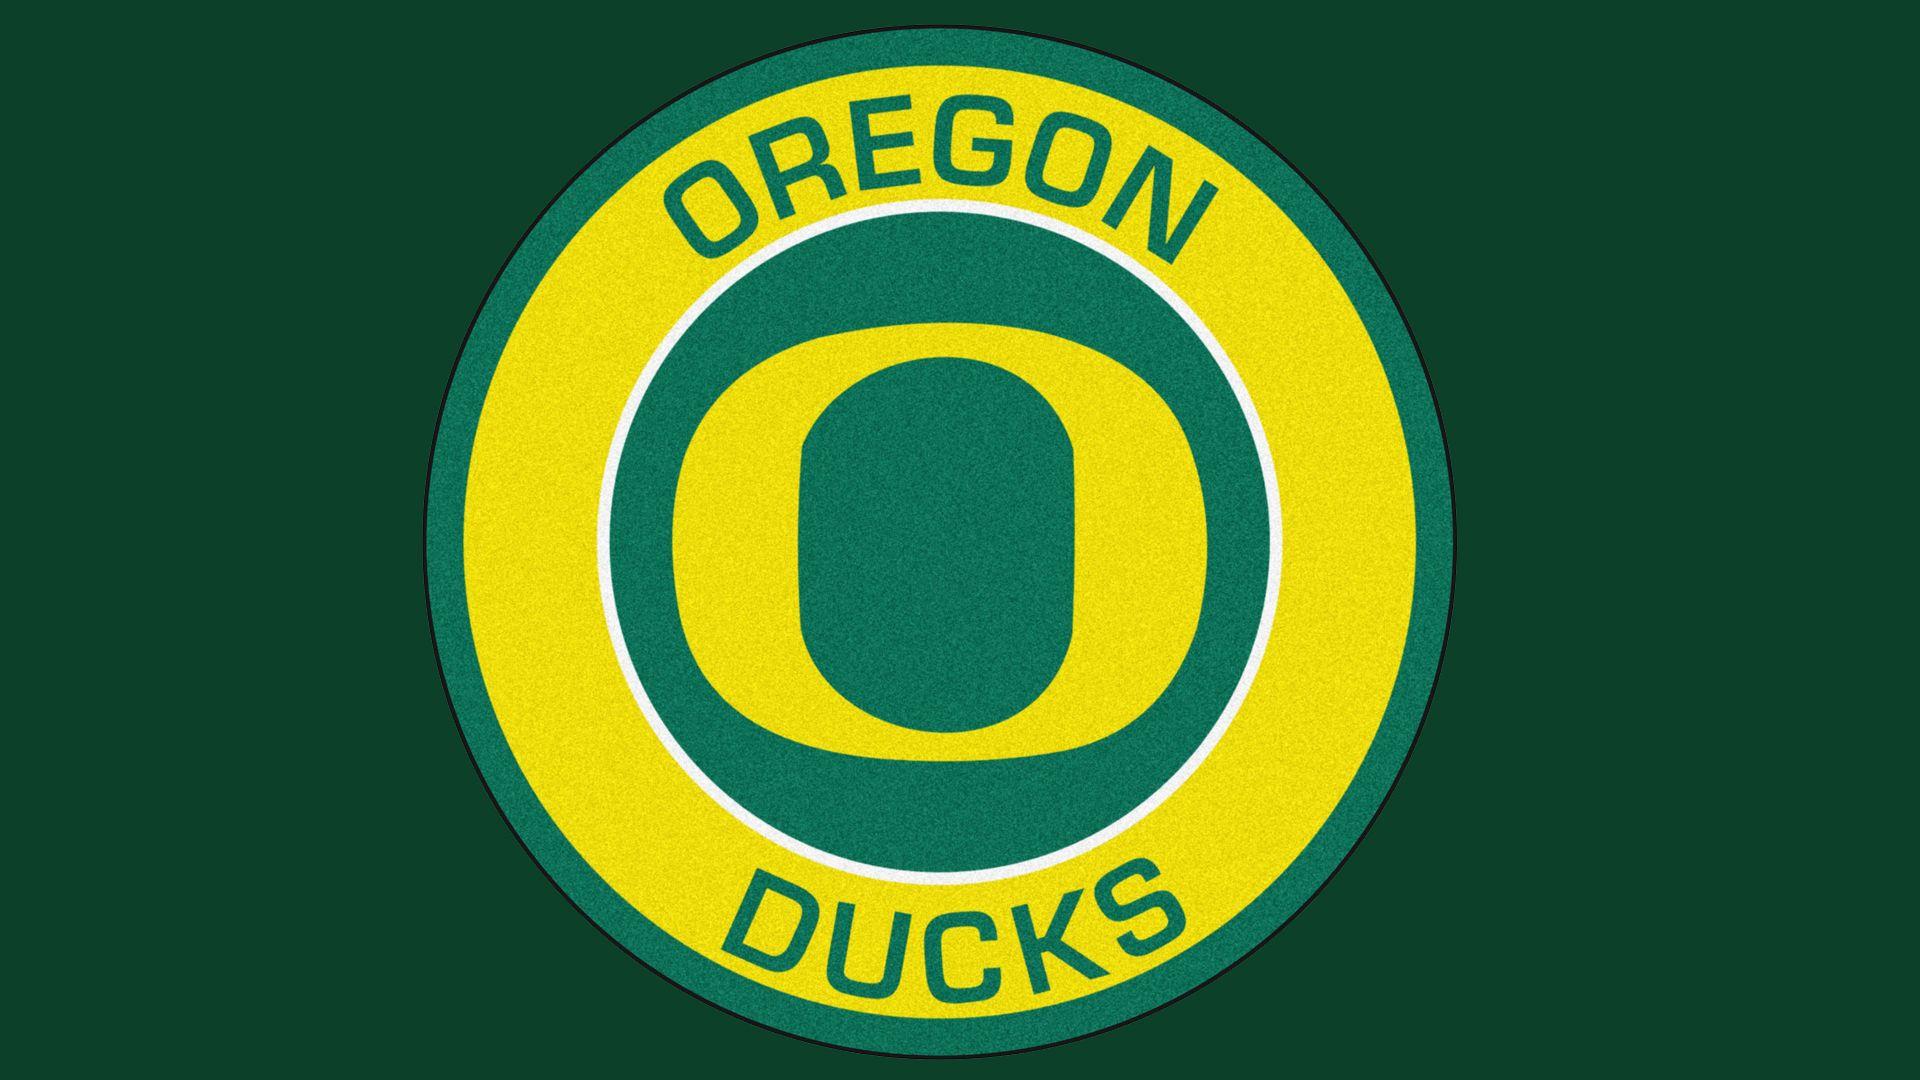 Oregon Ducks Logo - Oregon Ducks Logo, Oregon Ducks Symbol, Meaning, History and Evolution